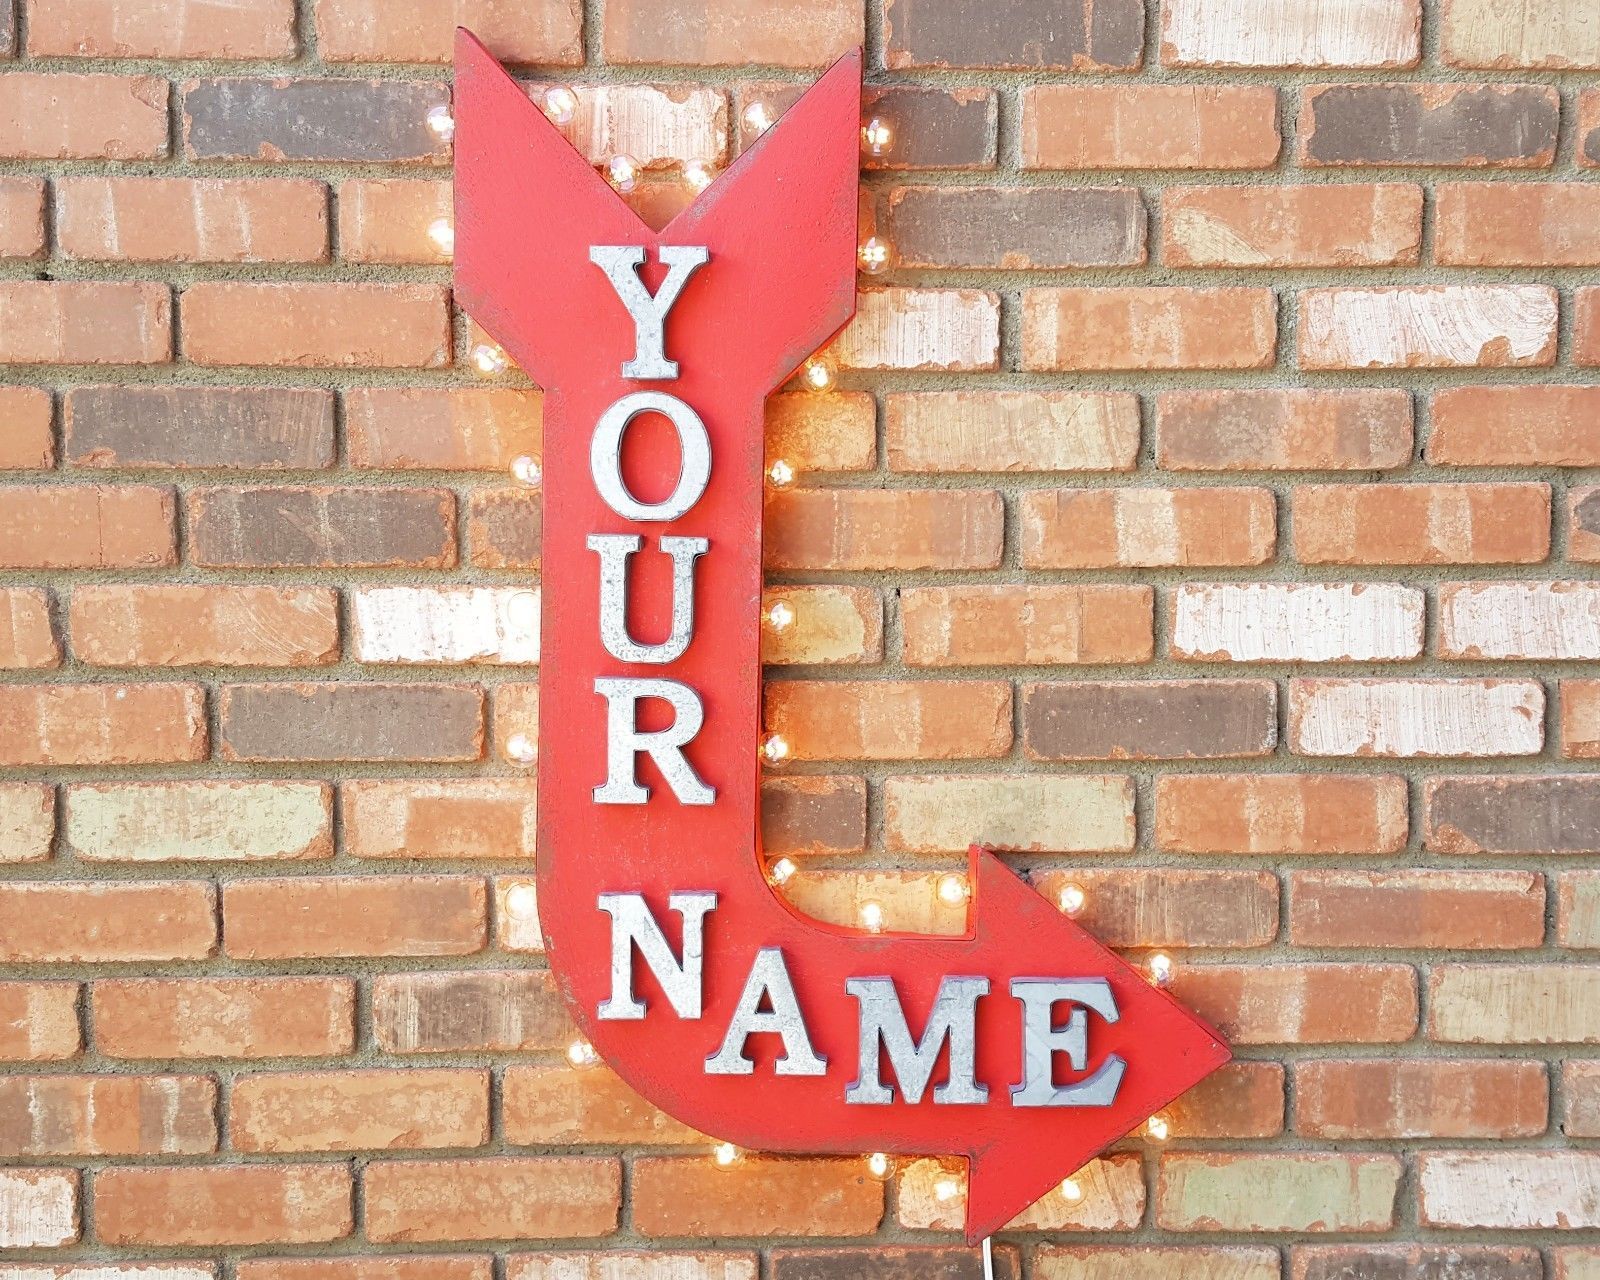 Marquee Sign for sale | Only 4 left at -60%